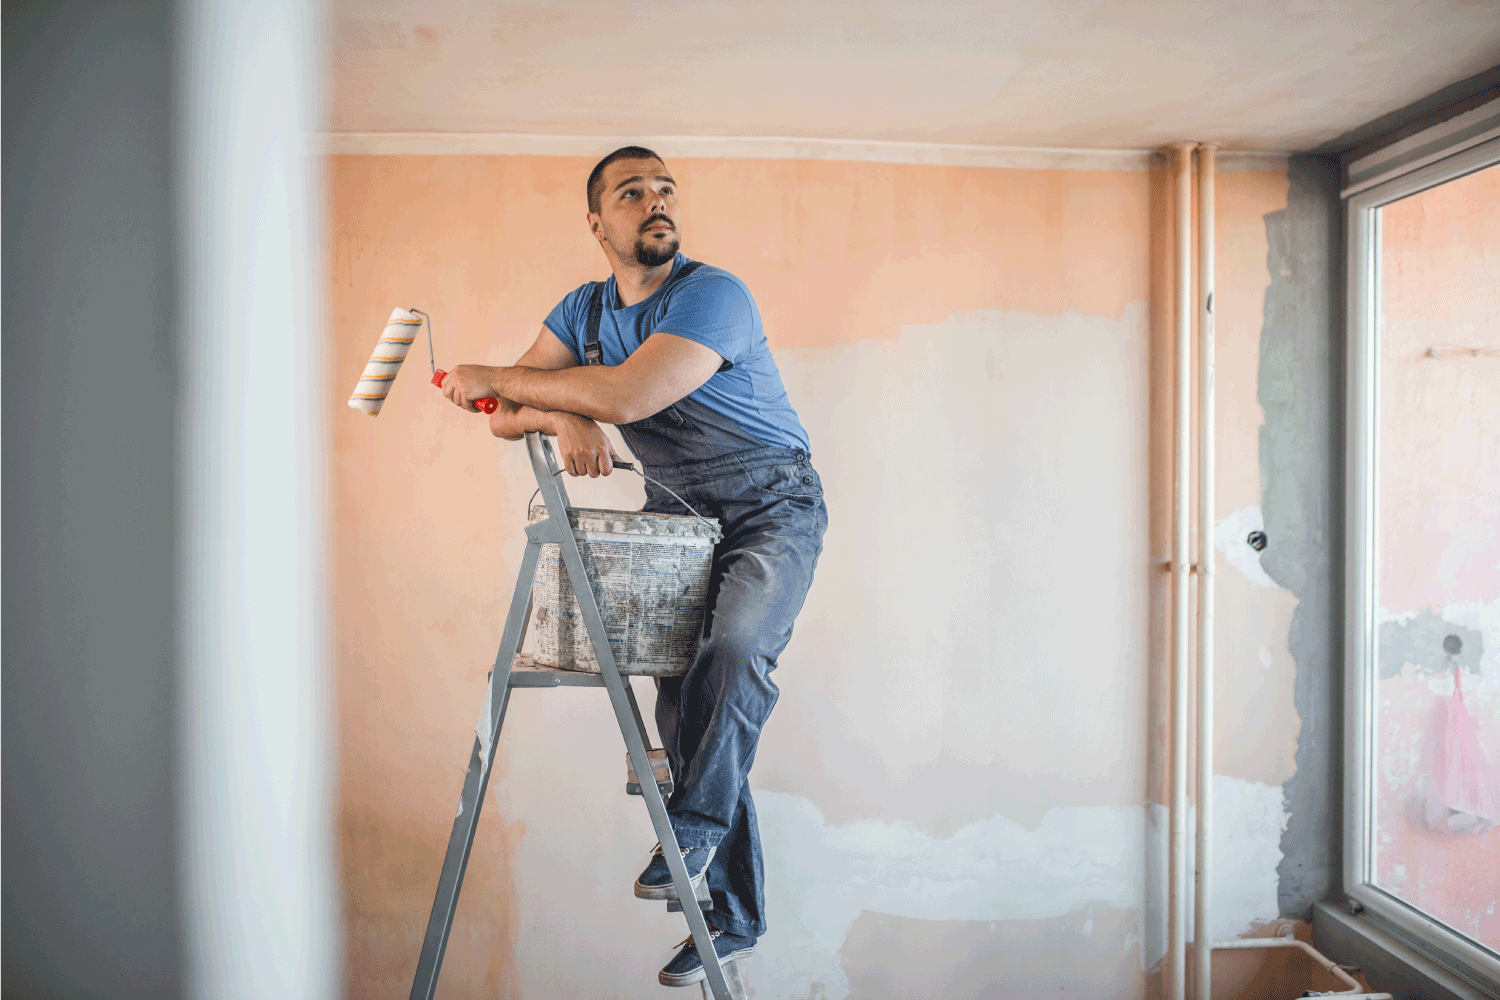 painter standing in room in coveralls holding paint roller and bucket